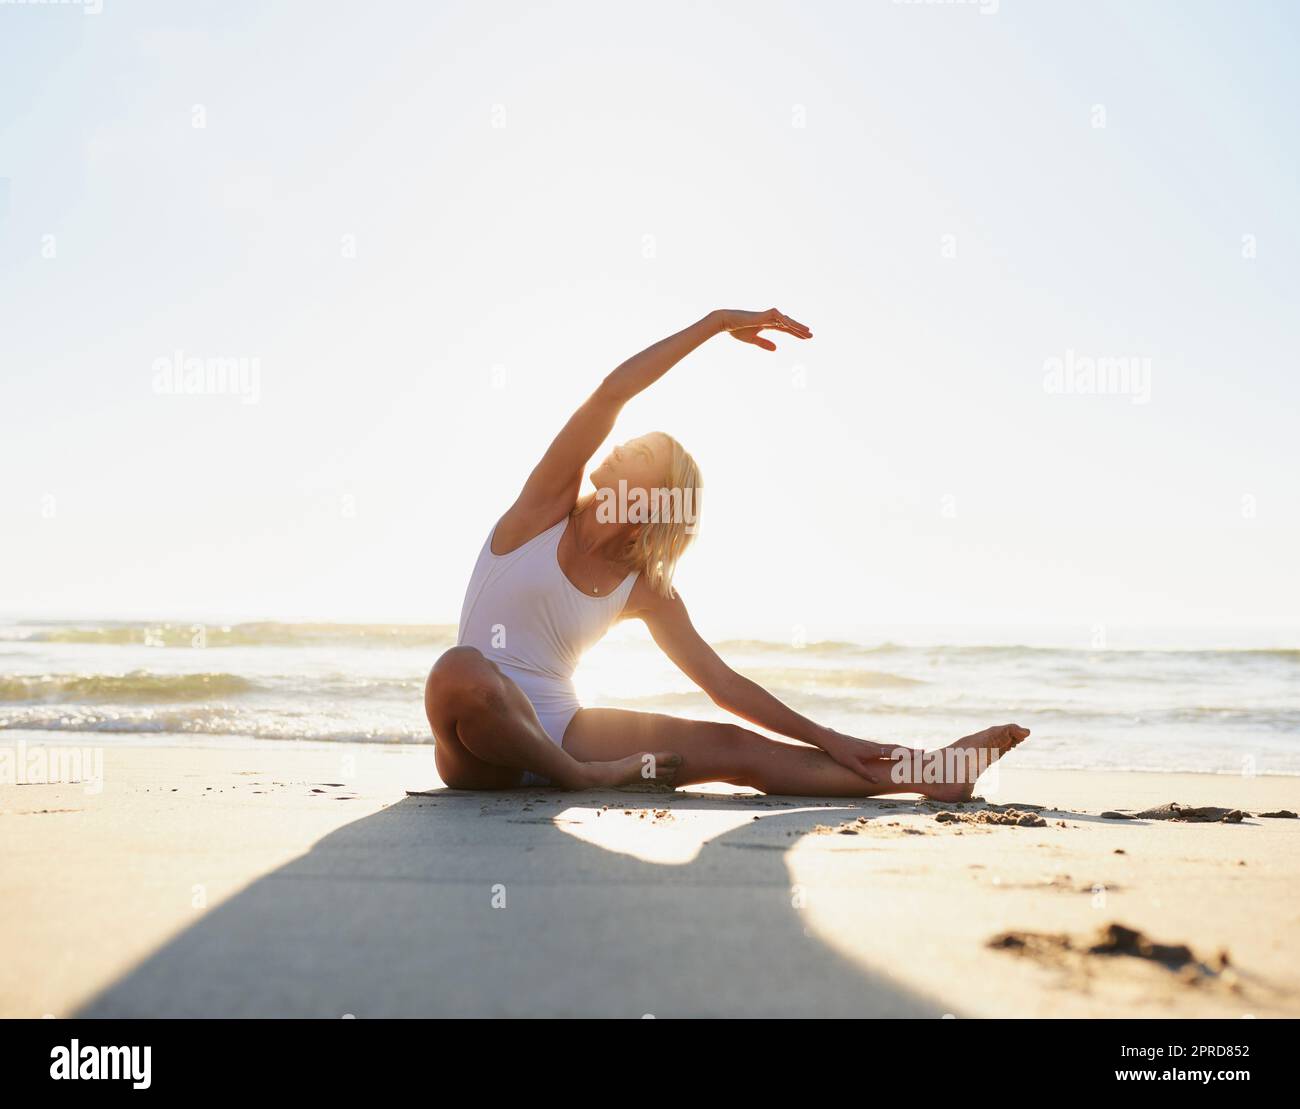 Stretch and hold. Full length shot of an attractive young woman doing a yoga stretch early in the morning on the beach. Stock Photo